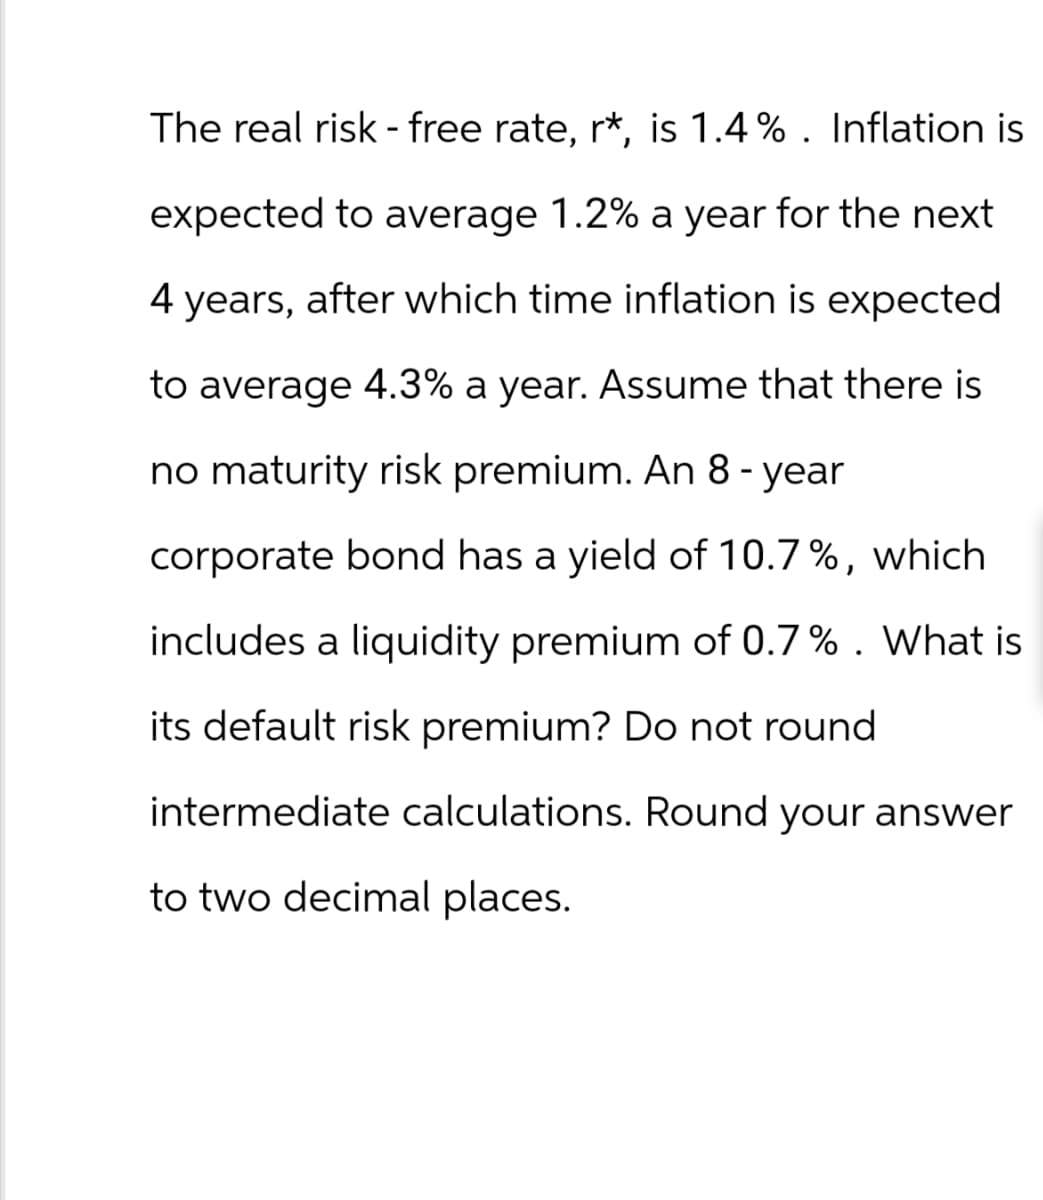 The real risk-free rate, r*, is 1.4%. Inflation is
expected to average 1.2% a year for the next
4 years, after which time inflation is expected
to average 4.3% a year. Assume that there is
no maturity risk premium. An 8-year
corporate bond has a yield of 10.7%, which
includes a liquidity premium of 0.7%. What is
its default risk premium? Do not round
intermediate calculations. Round your answer
to two decimal places.